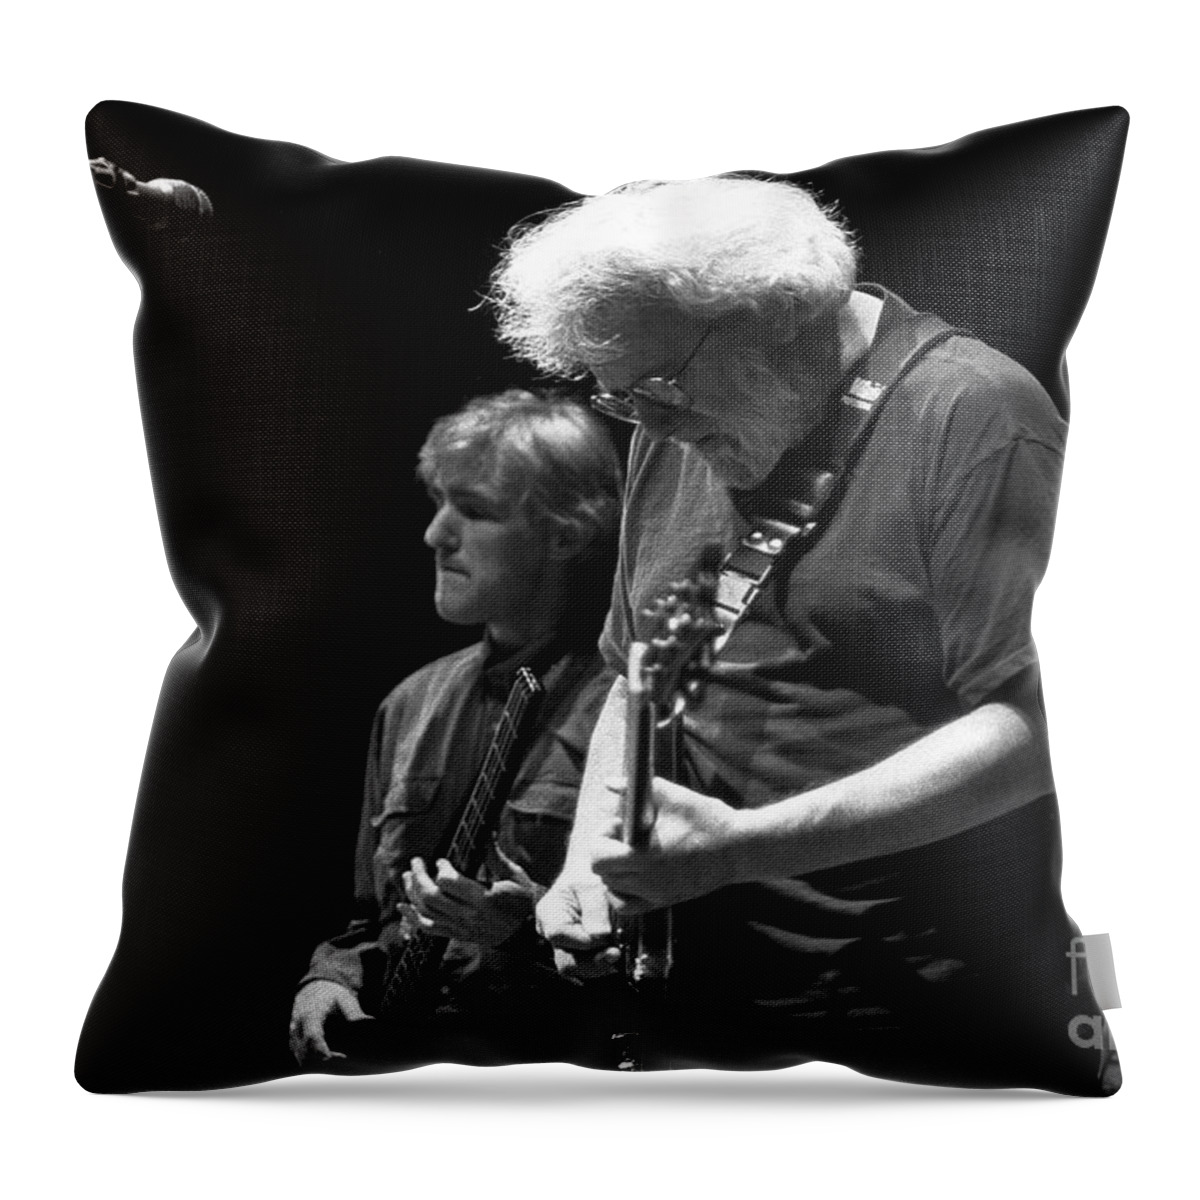 Singer Throw Pillow featuring the photograph Jerry Garcia #4 by Concert Photos